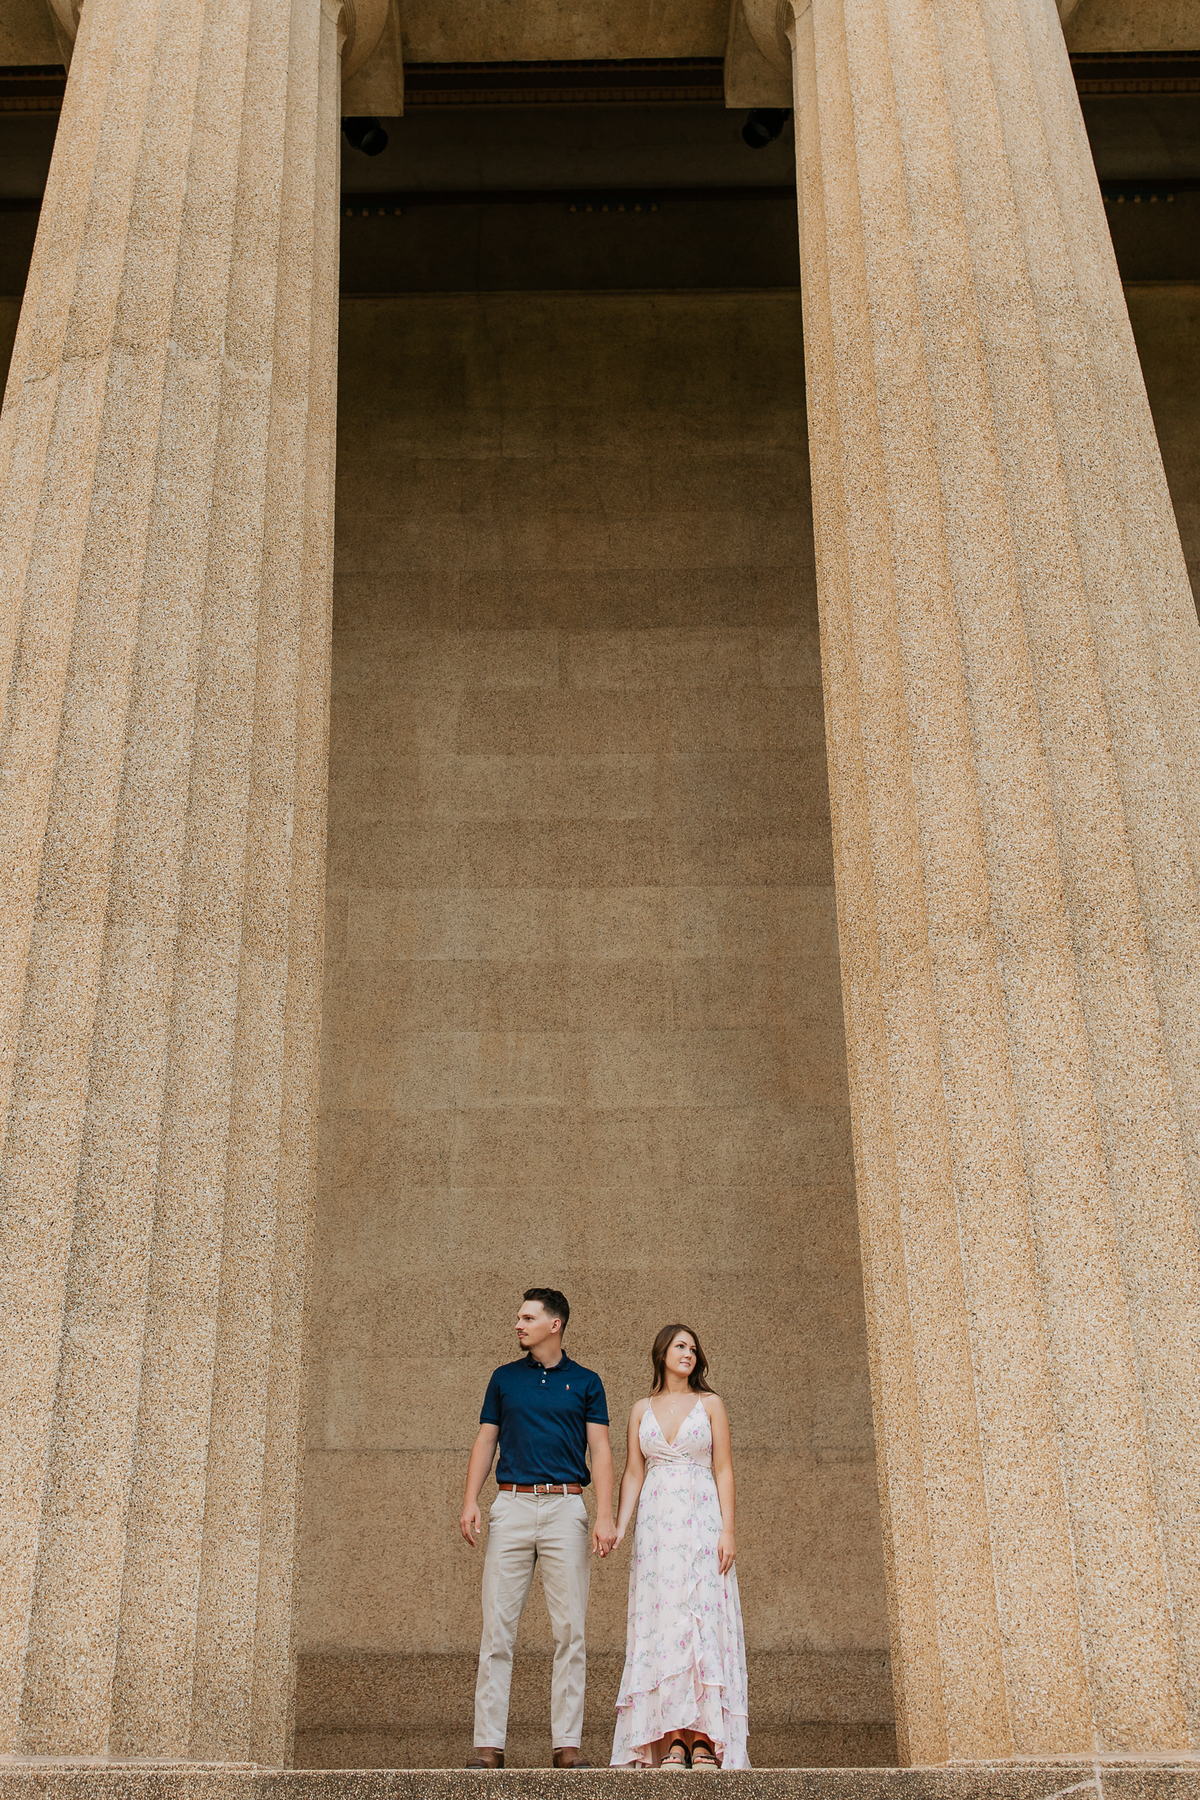 Nashville Pedestrian Bridge and Centenniel Park Engagement Session | Nashville, TN | Carly Crawford Photography | Knoxville and Tennessee Wedding, Couples, and Portrait Photographer-287343